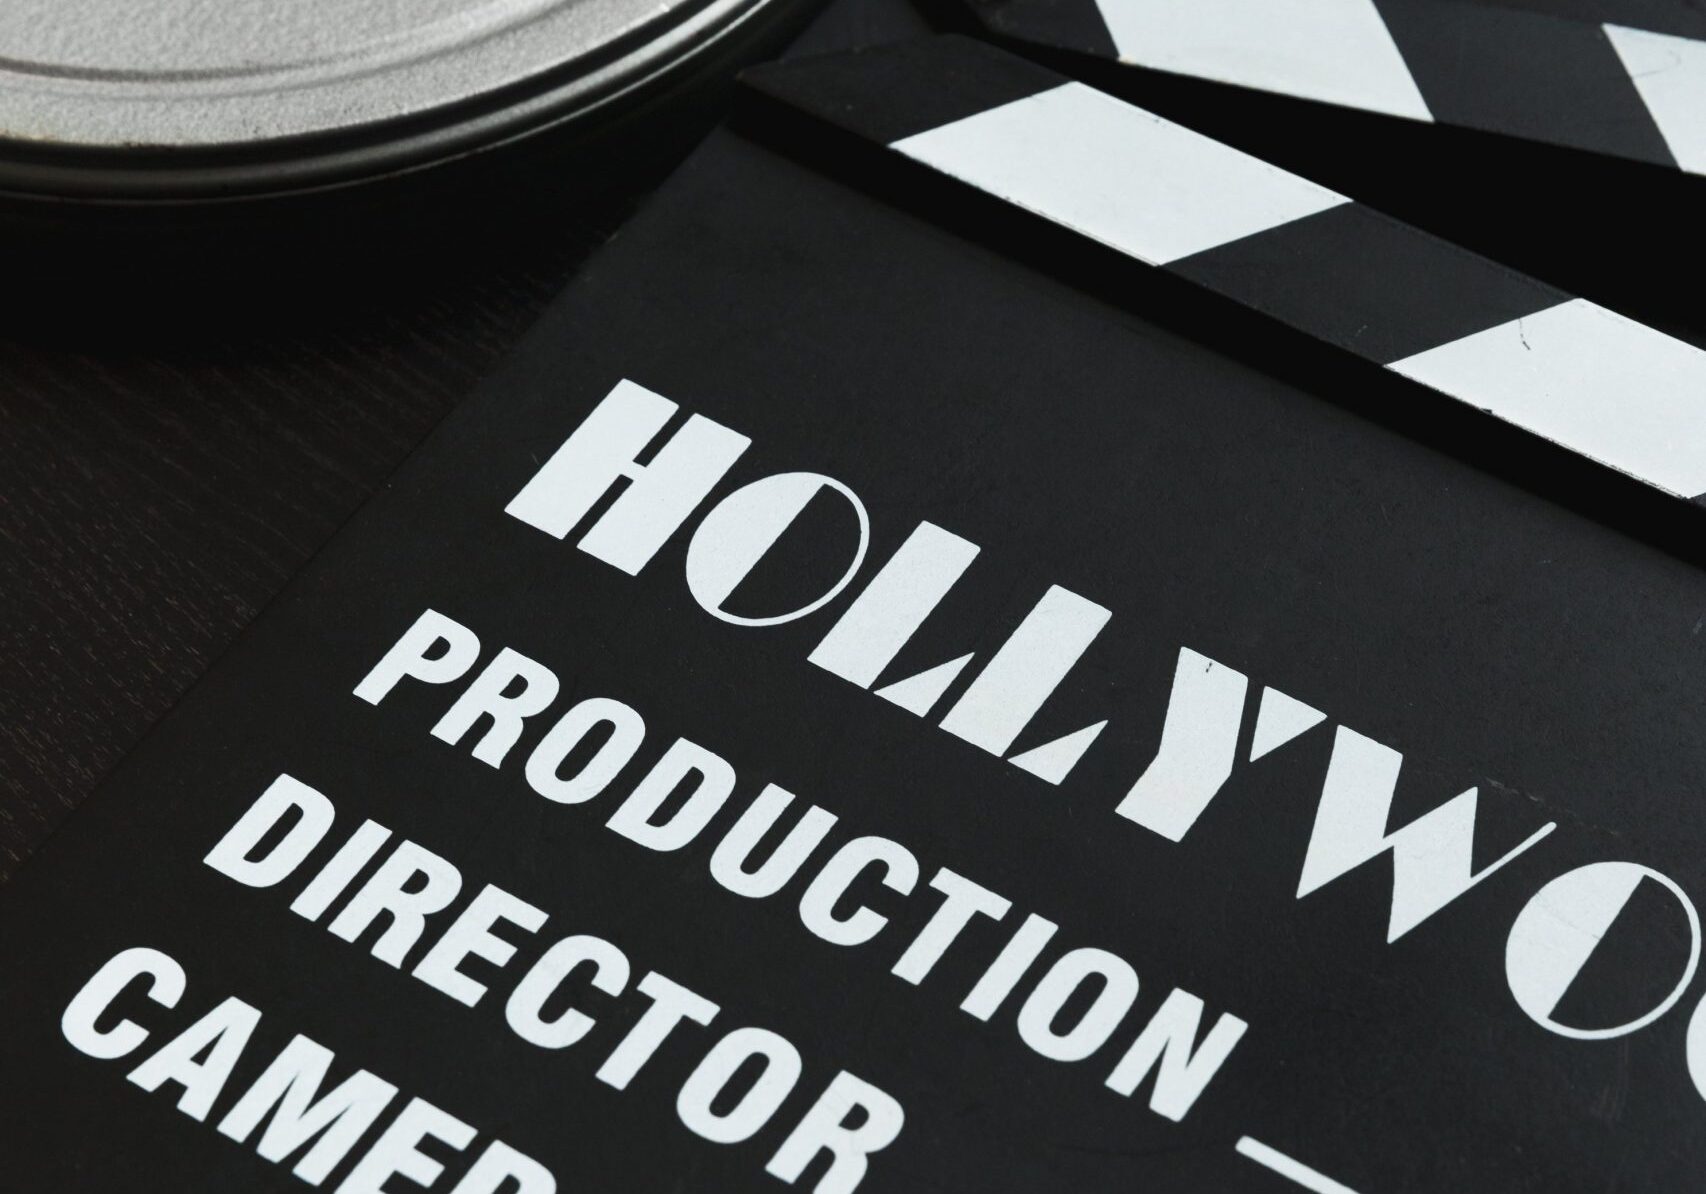 a-silver-film-reel-canister-and-a-movie-clapper-board